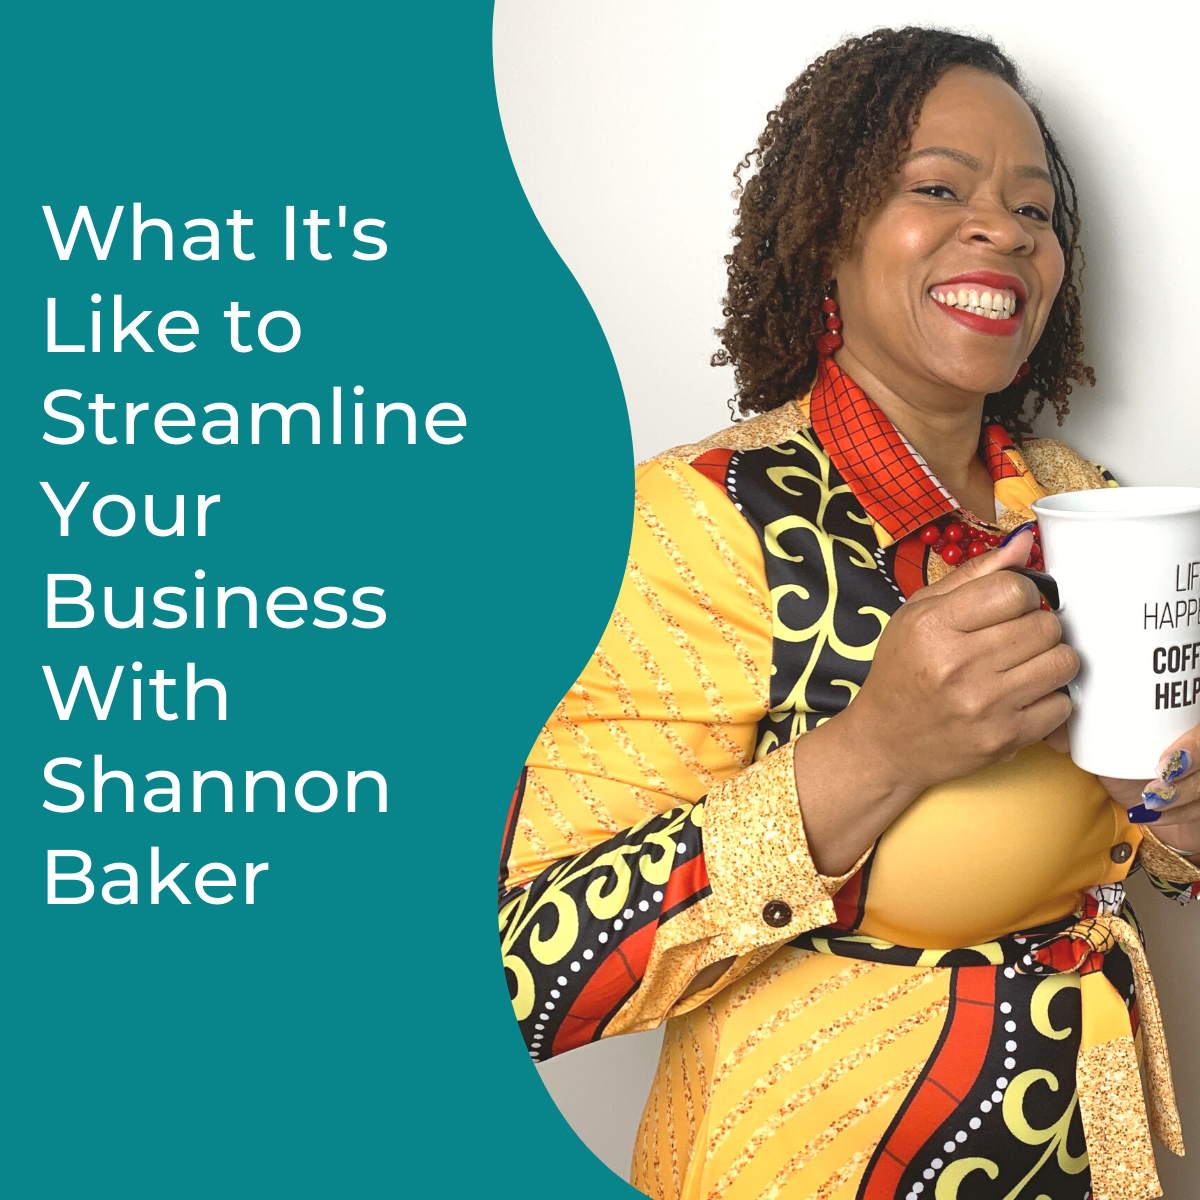 You are currently viewing What It’s Like to Streamline Your Business With Shannon Baker